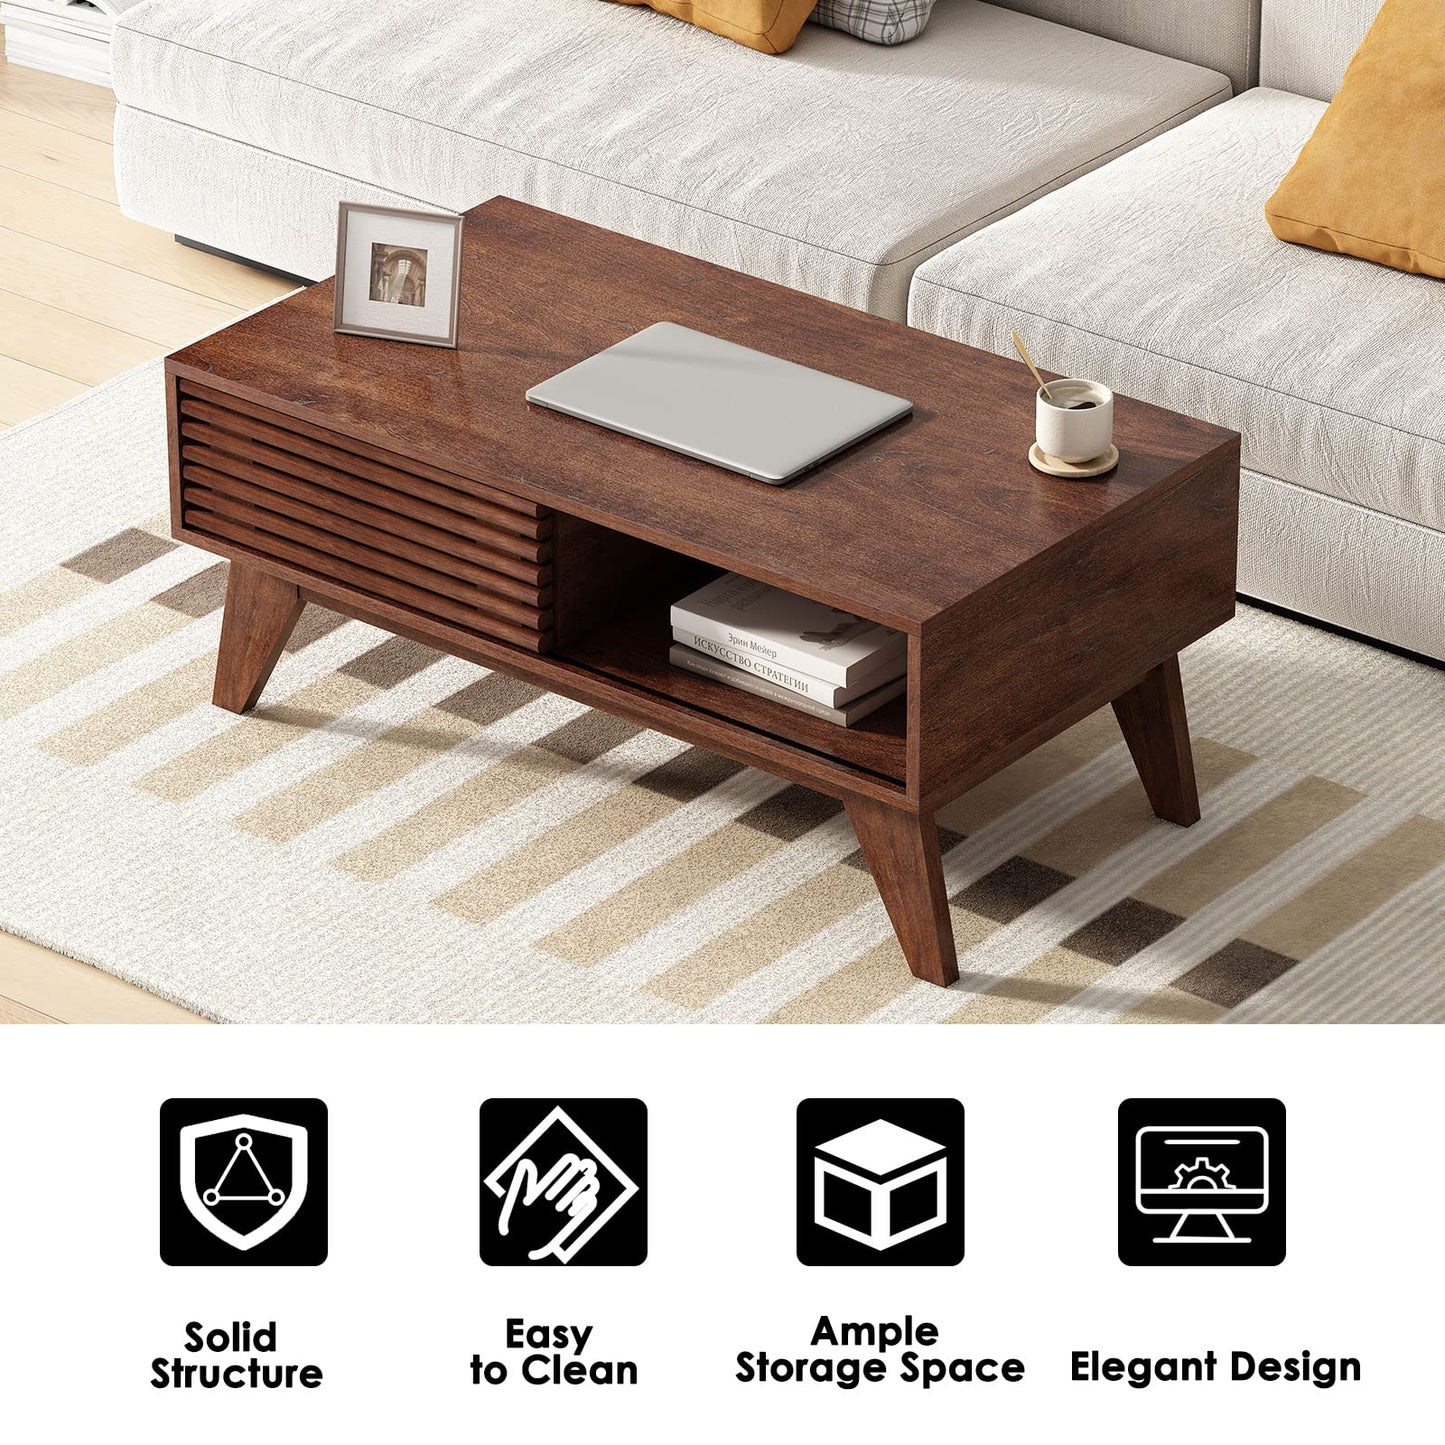 SogesHome Mid Century Wood Coffee Table, Cocktail Table Tea Table with Wood Slat Sliding Door, Snack Coffee Station with 2-Tier Storage Shelves for Living-Room, Brown